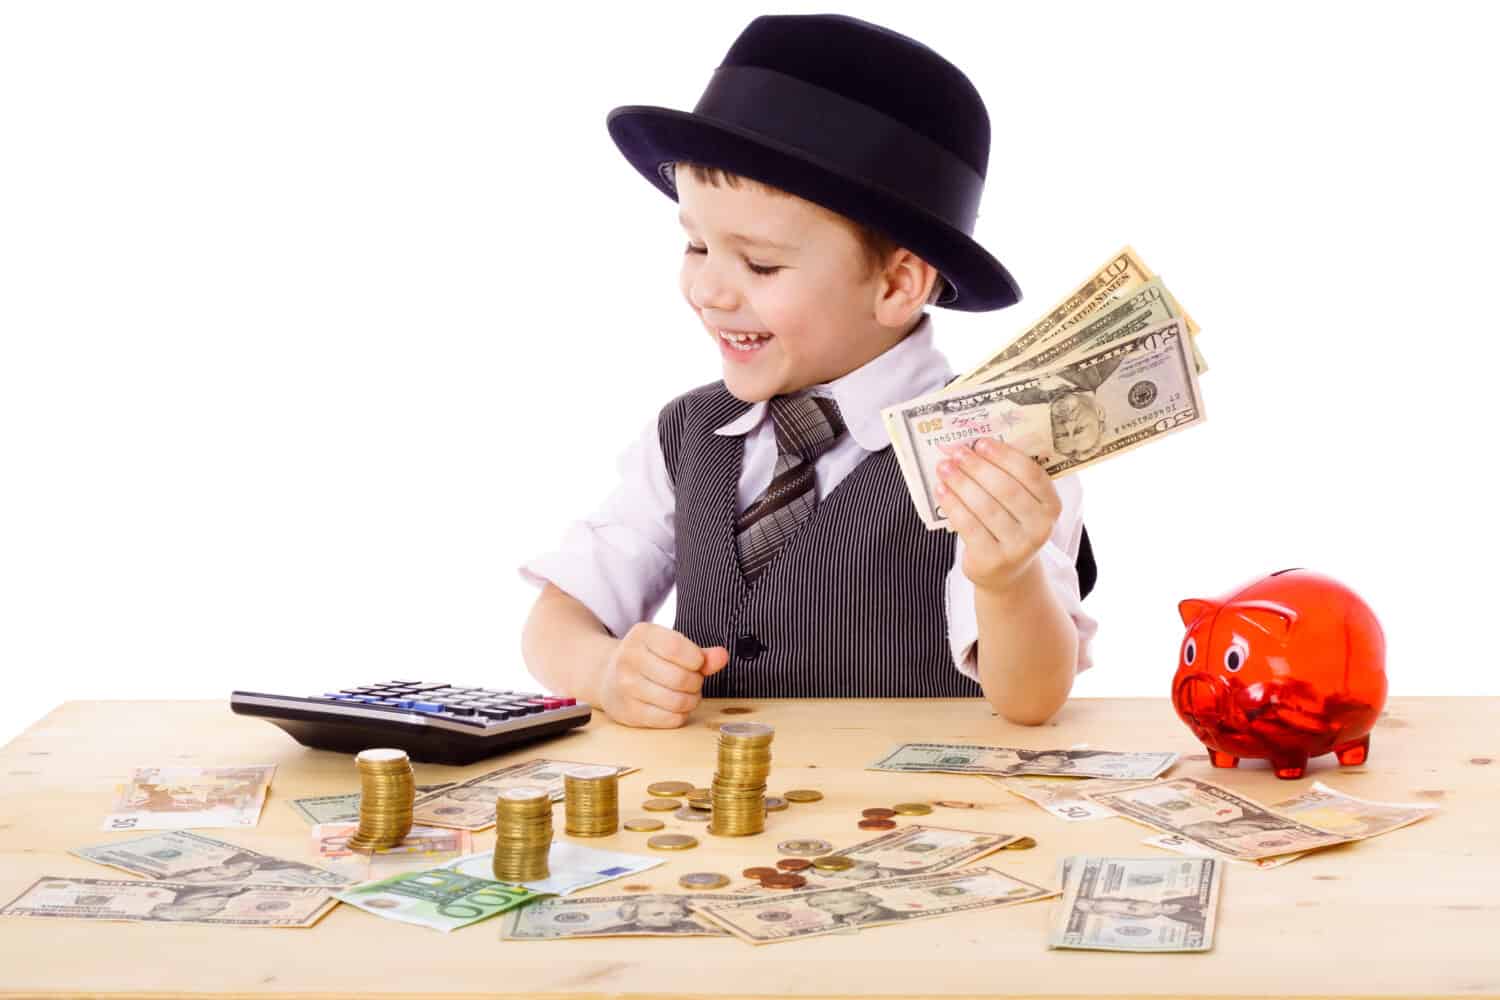 Little boy in black hat and tie at the table counts money, isolated on white